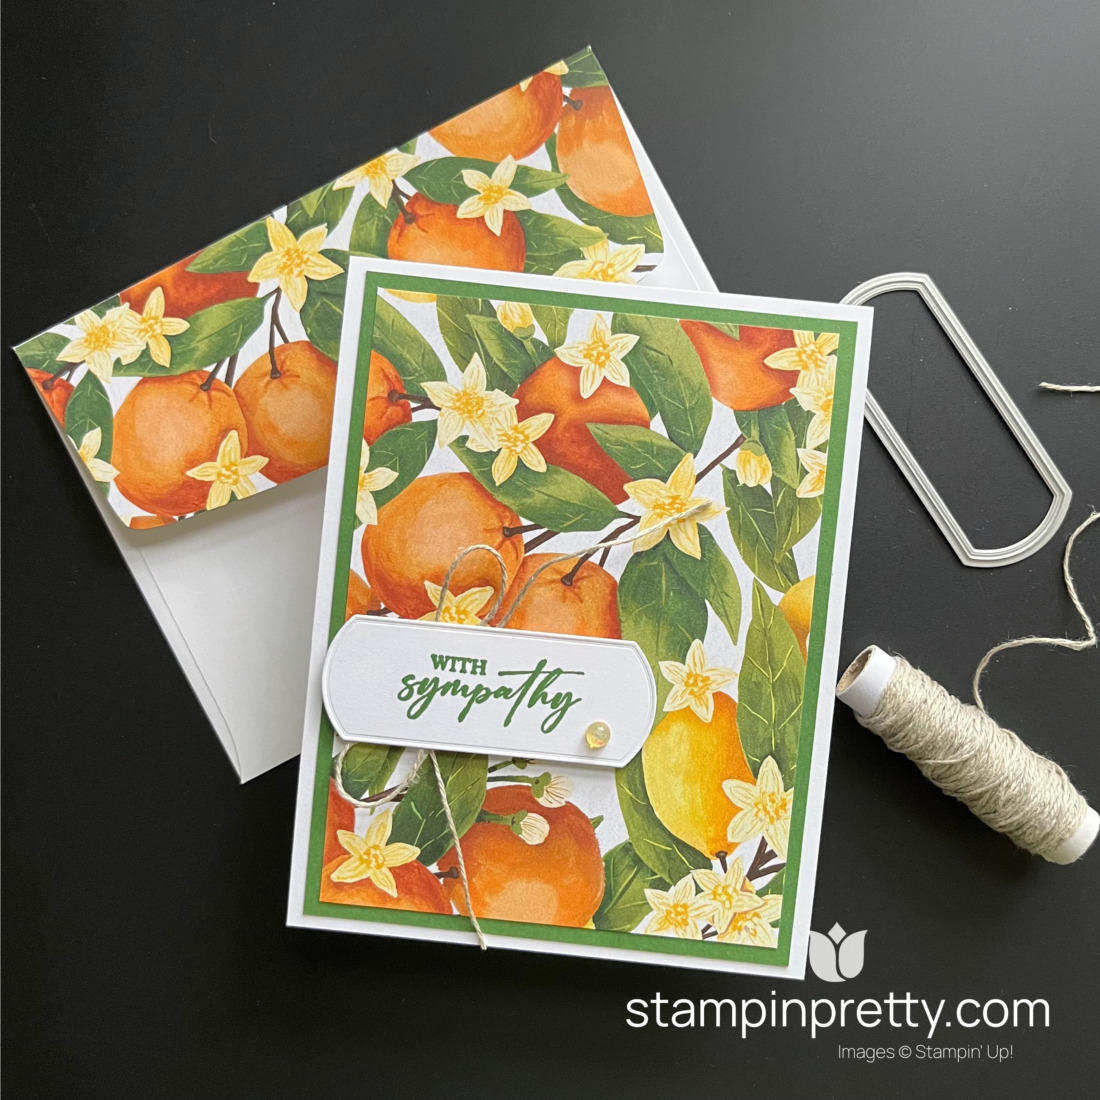 Create a sympathy card with the Mediterranean Blooms Designer Series Paper by Stampin' Up! Card by Mary Fish, Stampin' Pretty